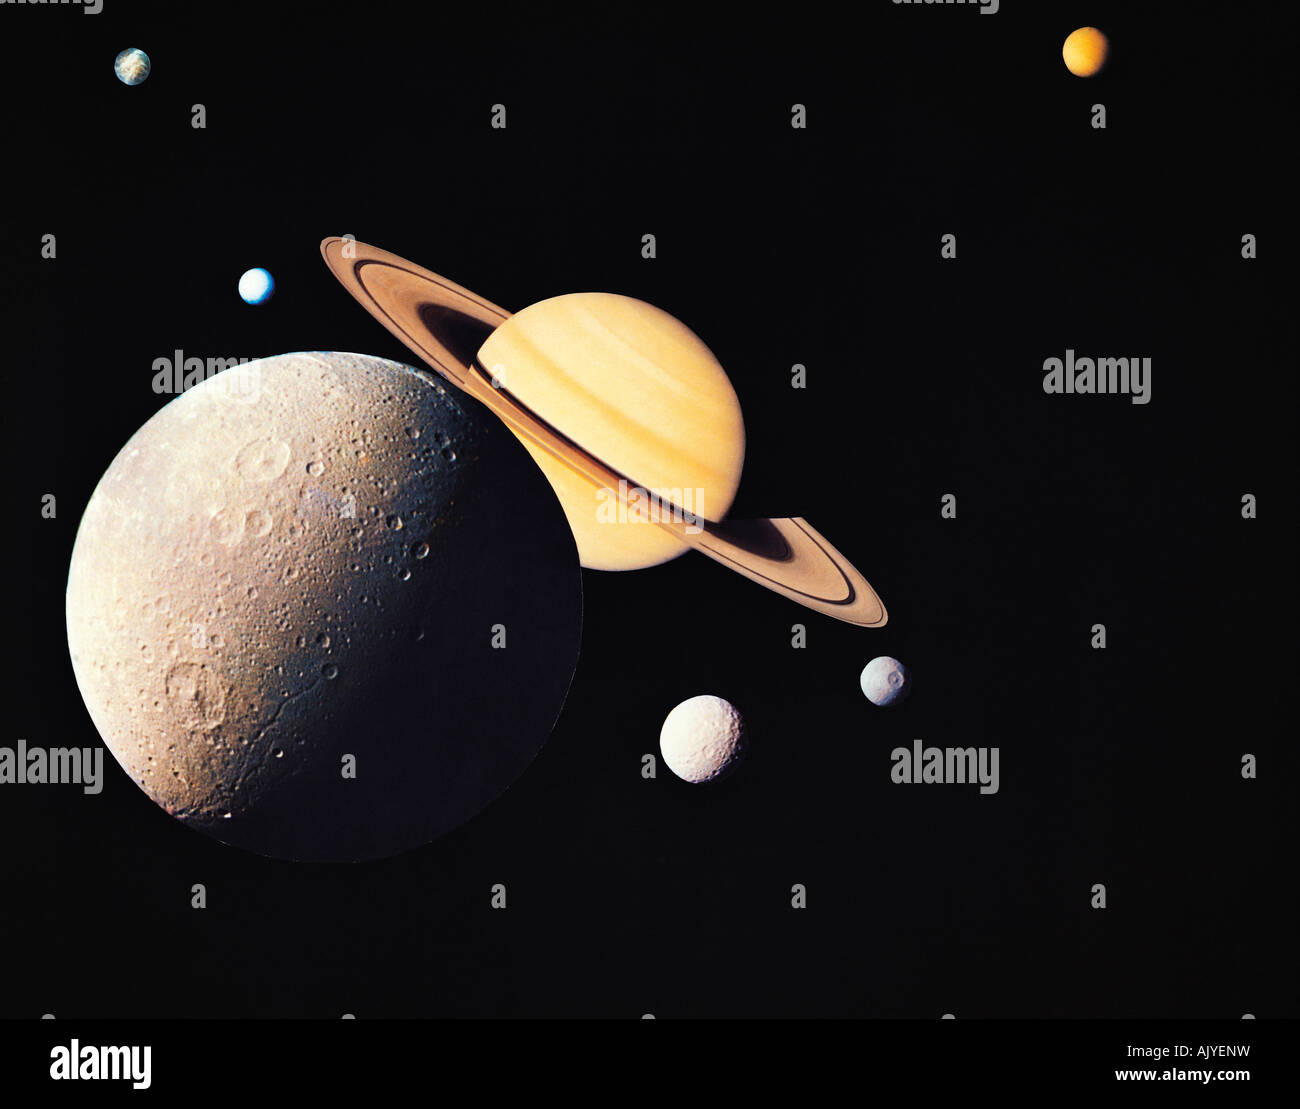 A montage of Saturn and its principal moons (Dione, Tethys, Mimas, Enceladus, Rhea and Titan Stock Photo